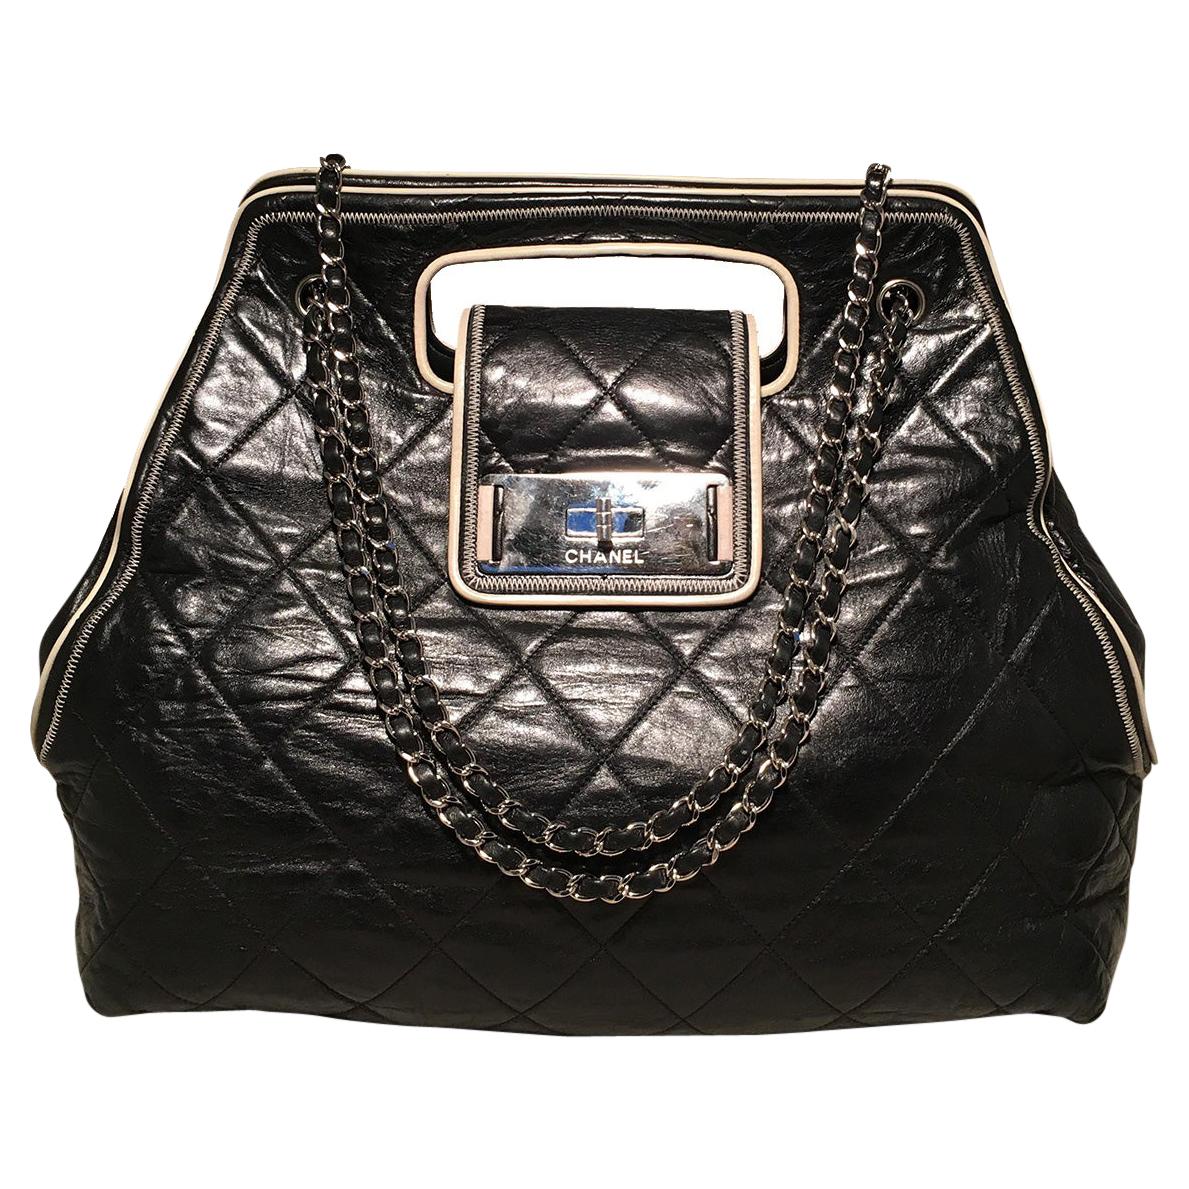 Chanel Black Leather East West Mademoiselle Cut Out Handle Tote 